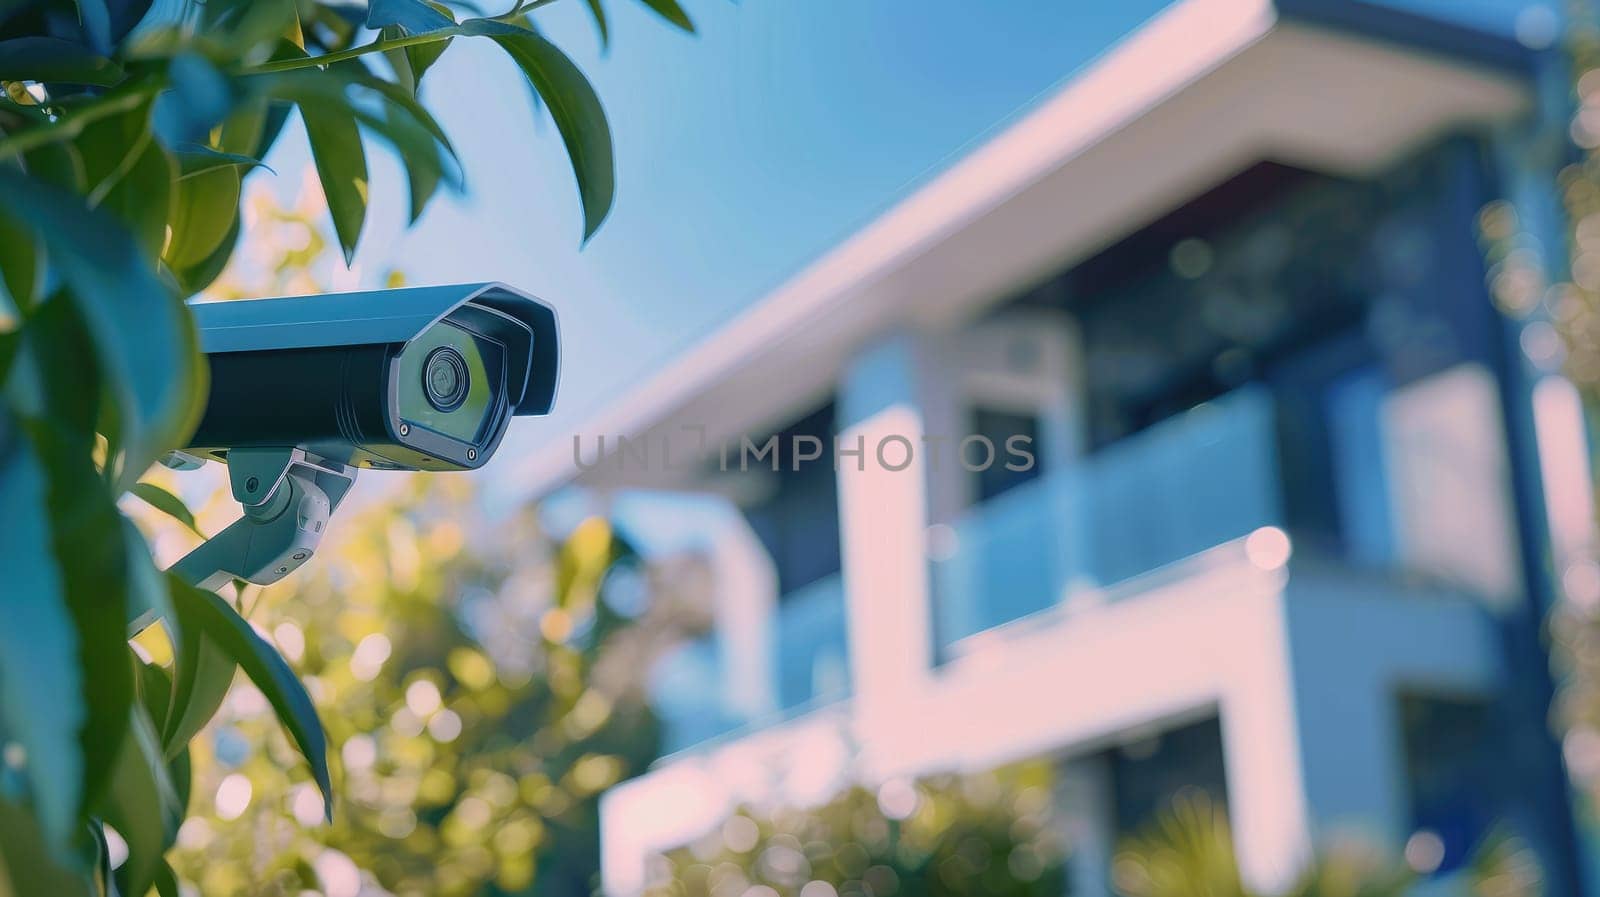 A security camera is mounted on a pole in front of a house, Home security and Smart home concept by nijieimu